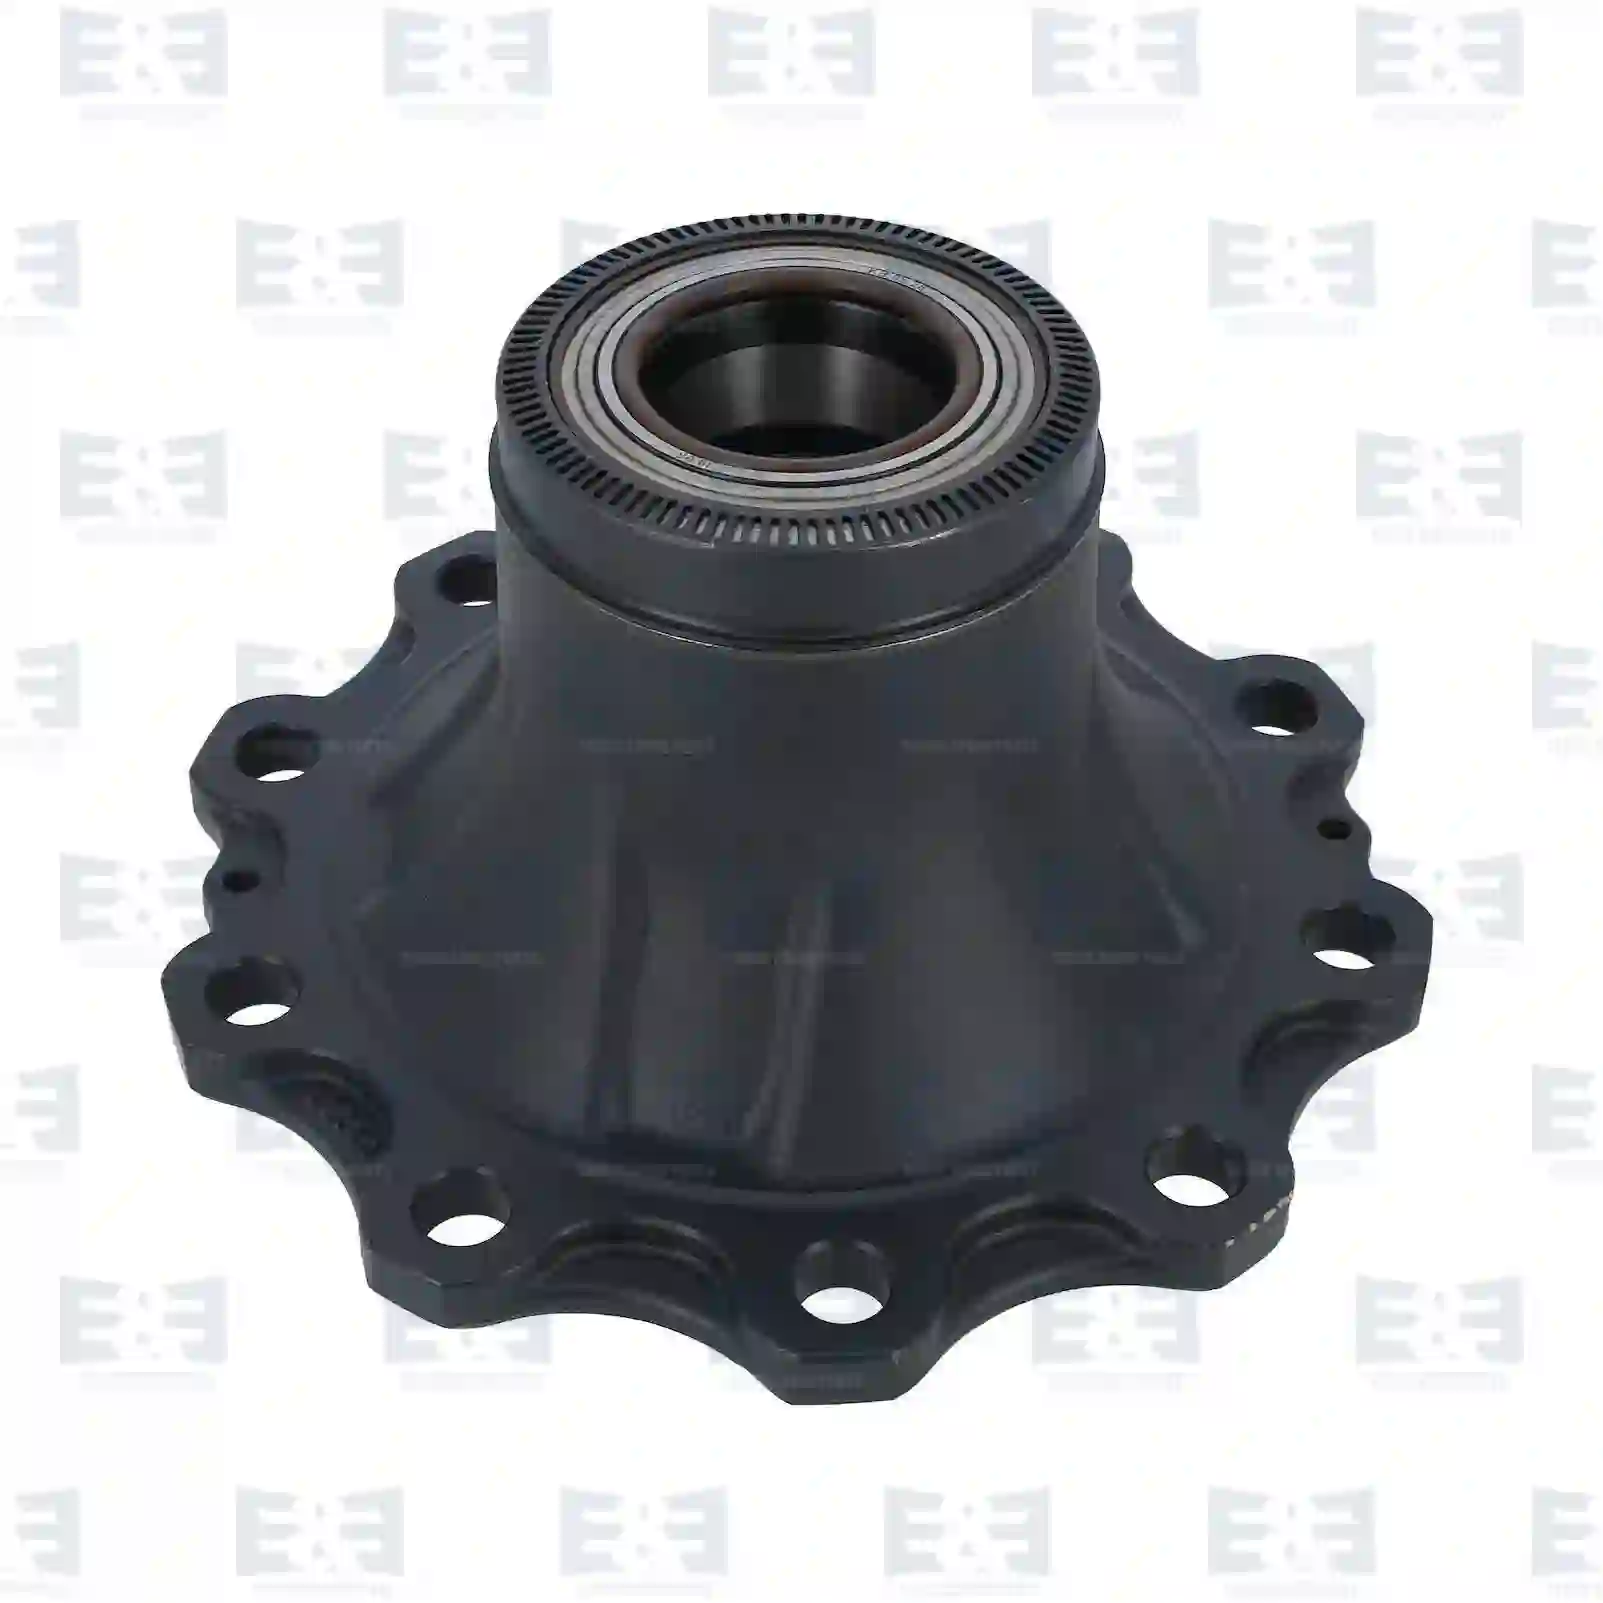  Wheel hub, with bearing, for drum brake || E&E Truck Spare Parts | Truck Spare Parts, Auotomotive Spare Parts